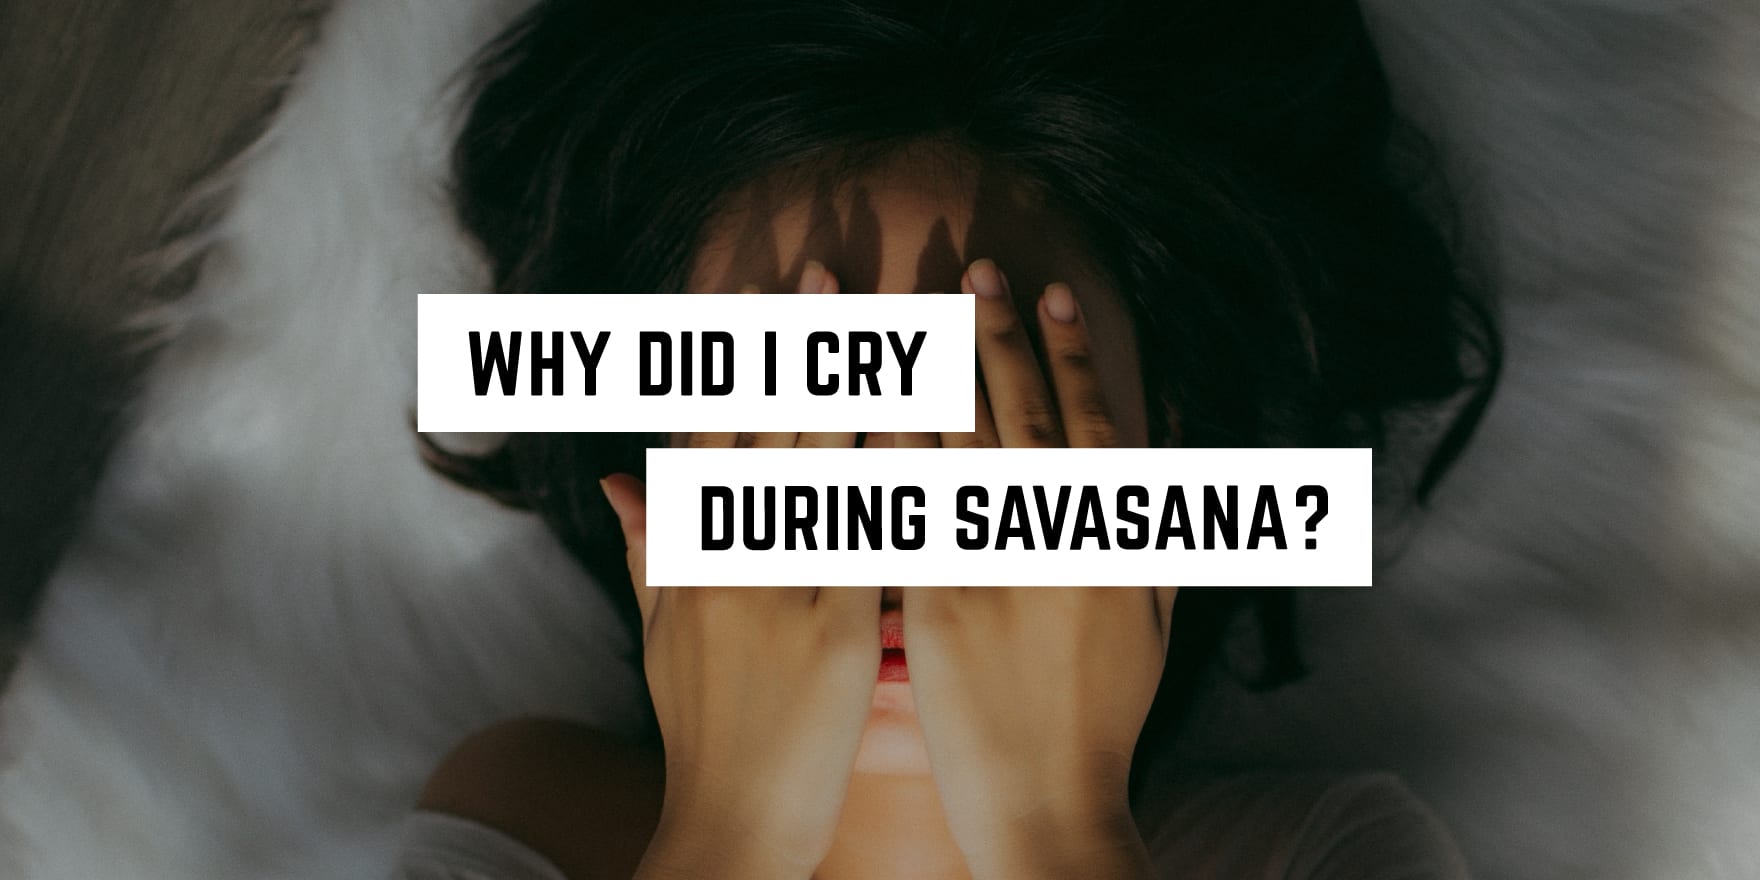 Emotional release: the unexpected tears of tranquility in savasana at a metaphysical shop.